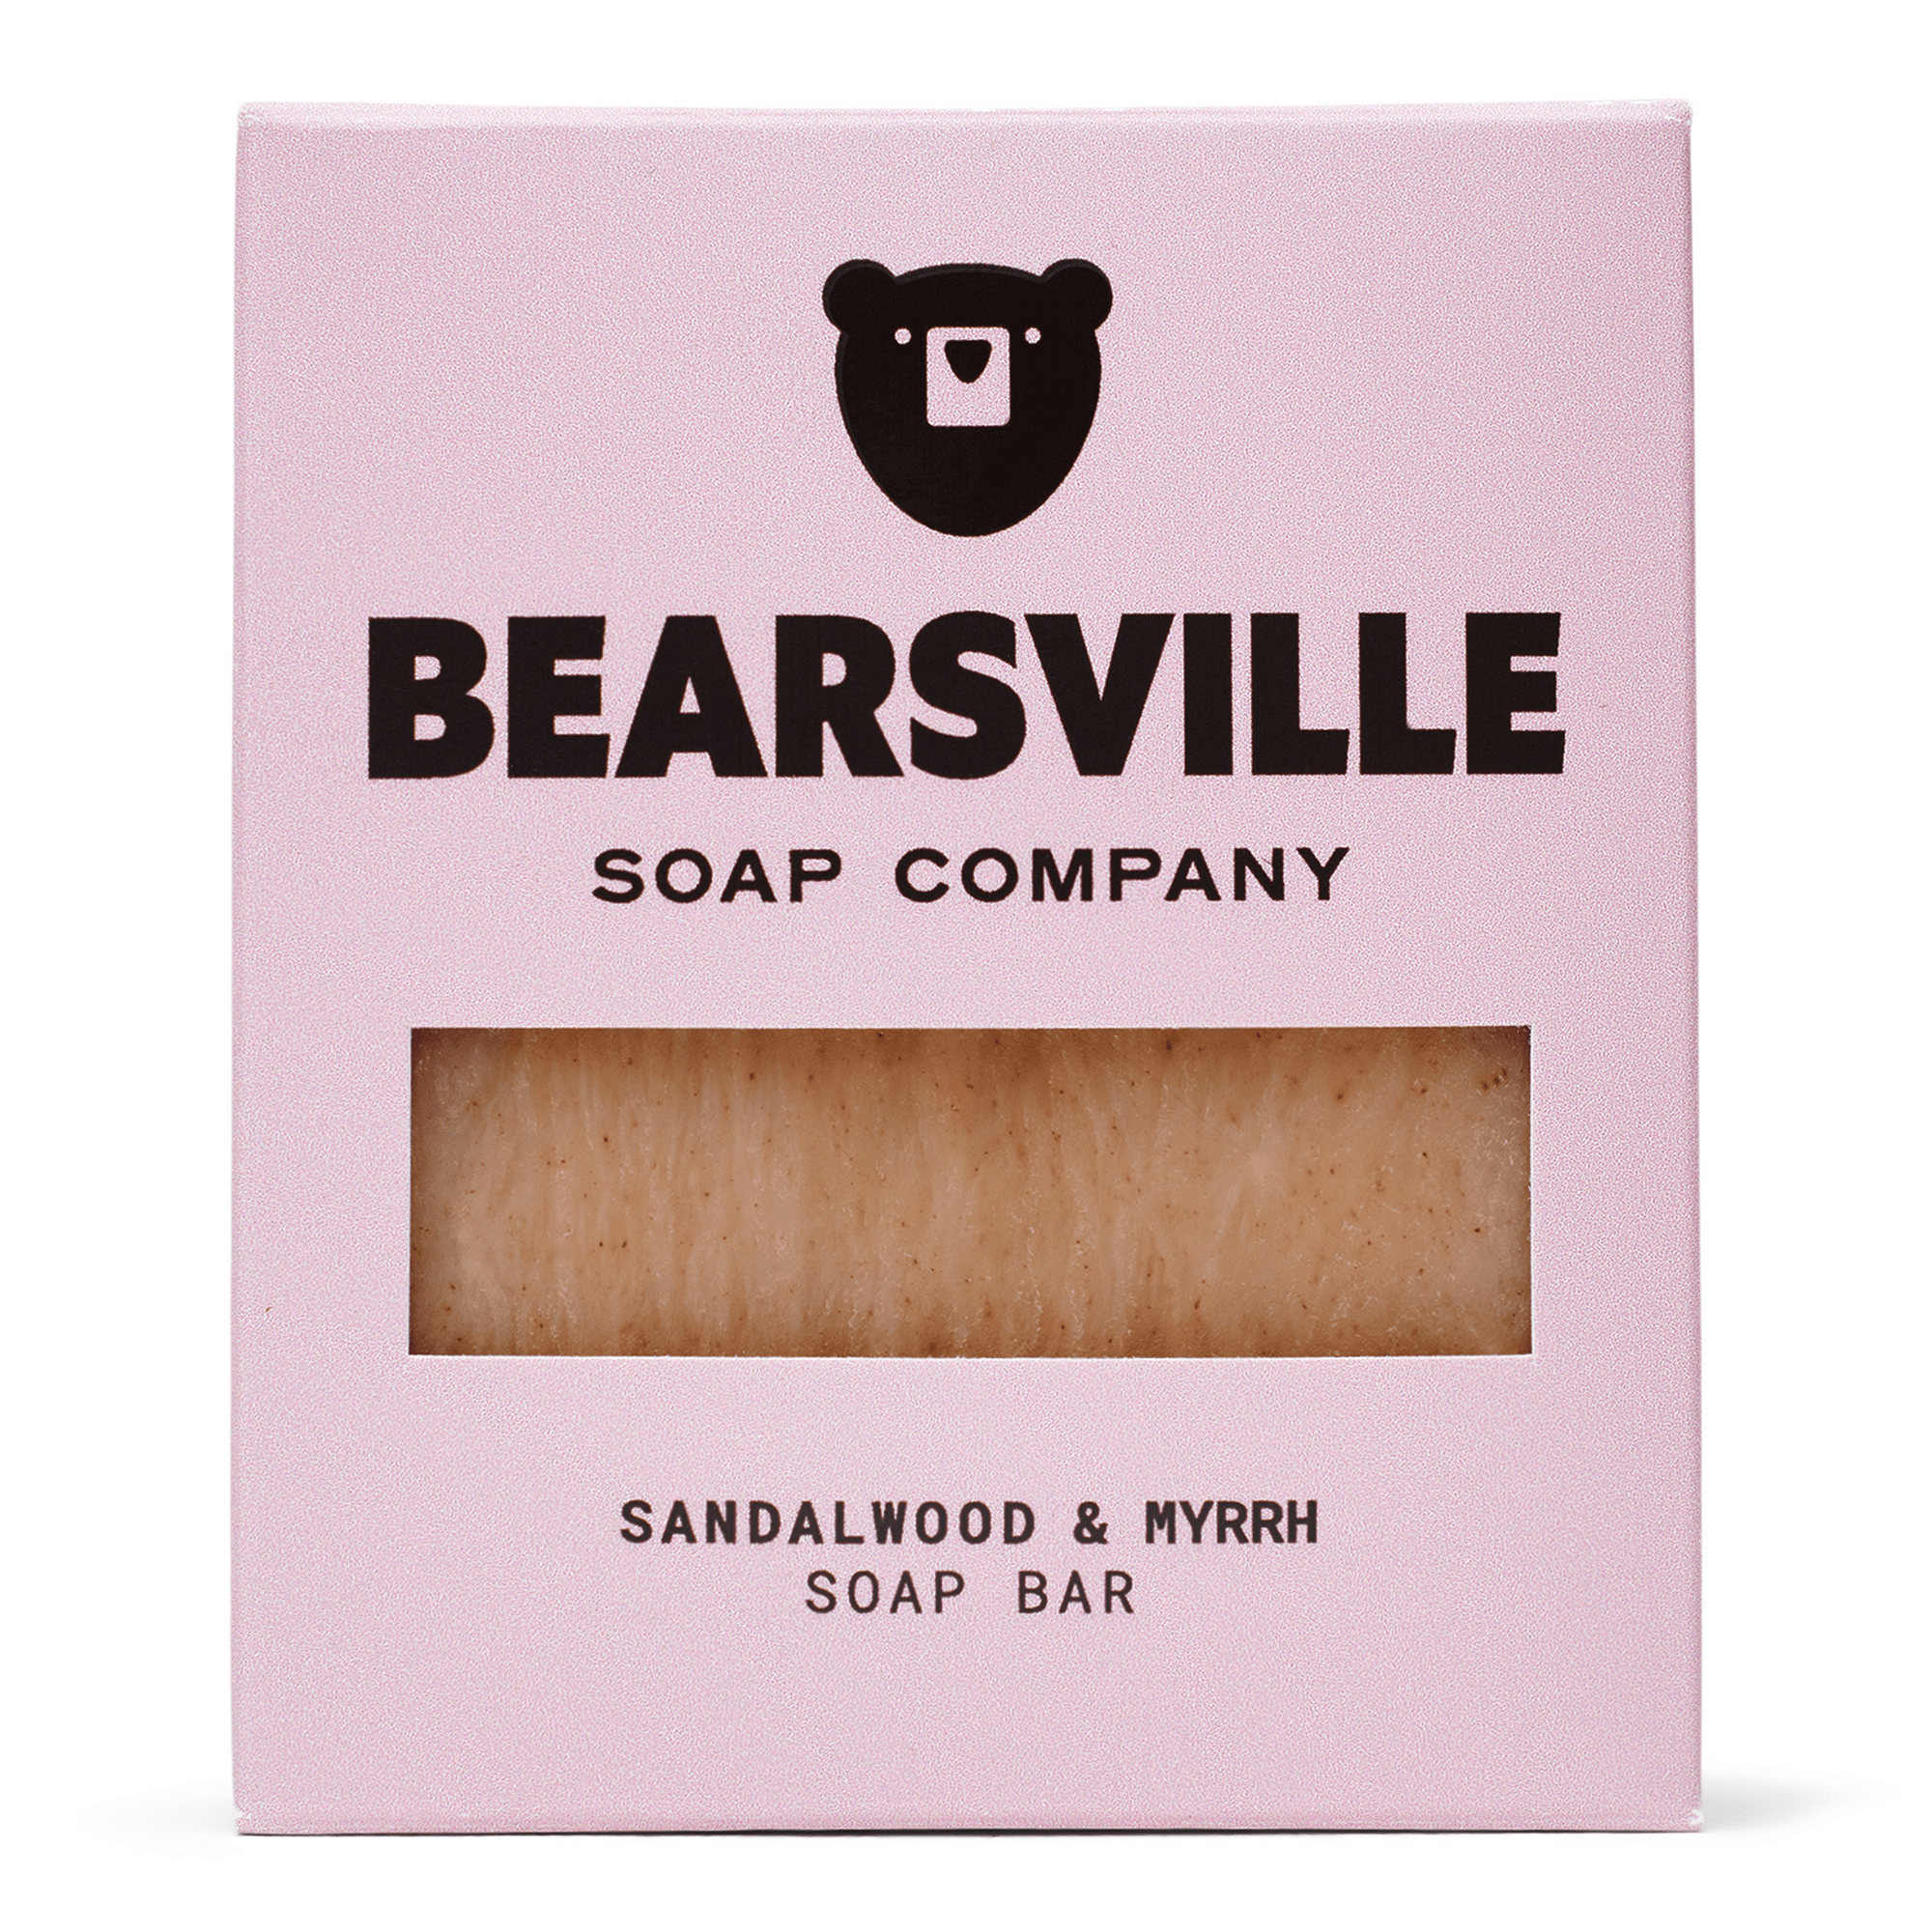 Not Sudsy Bear but still relevant to the soap world: What are your